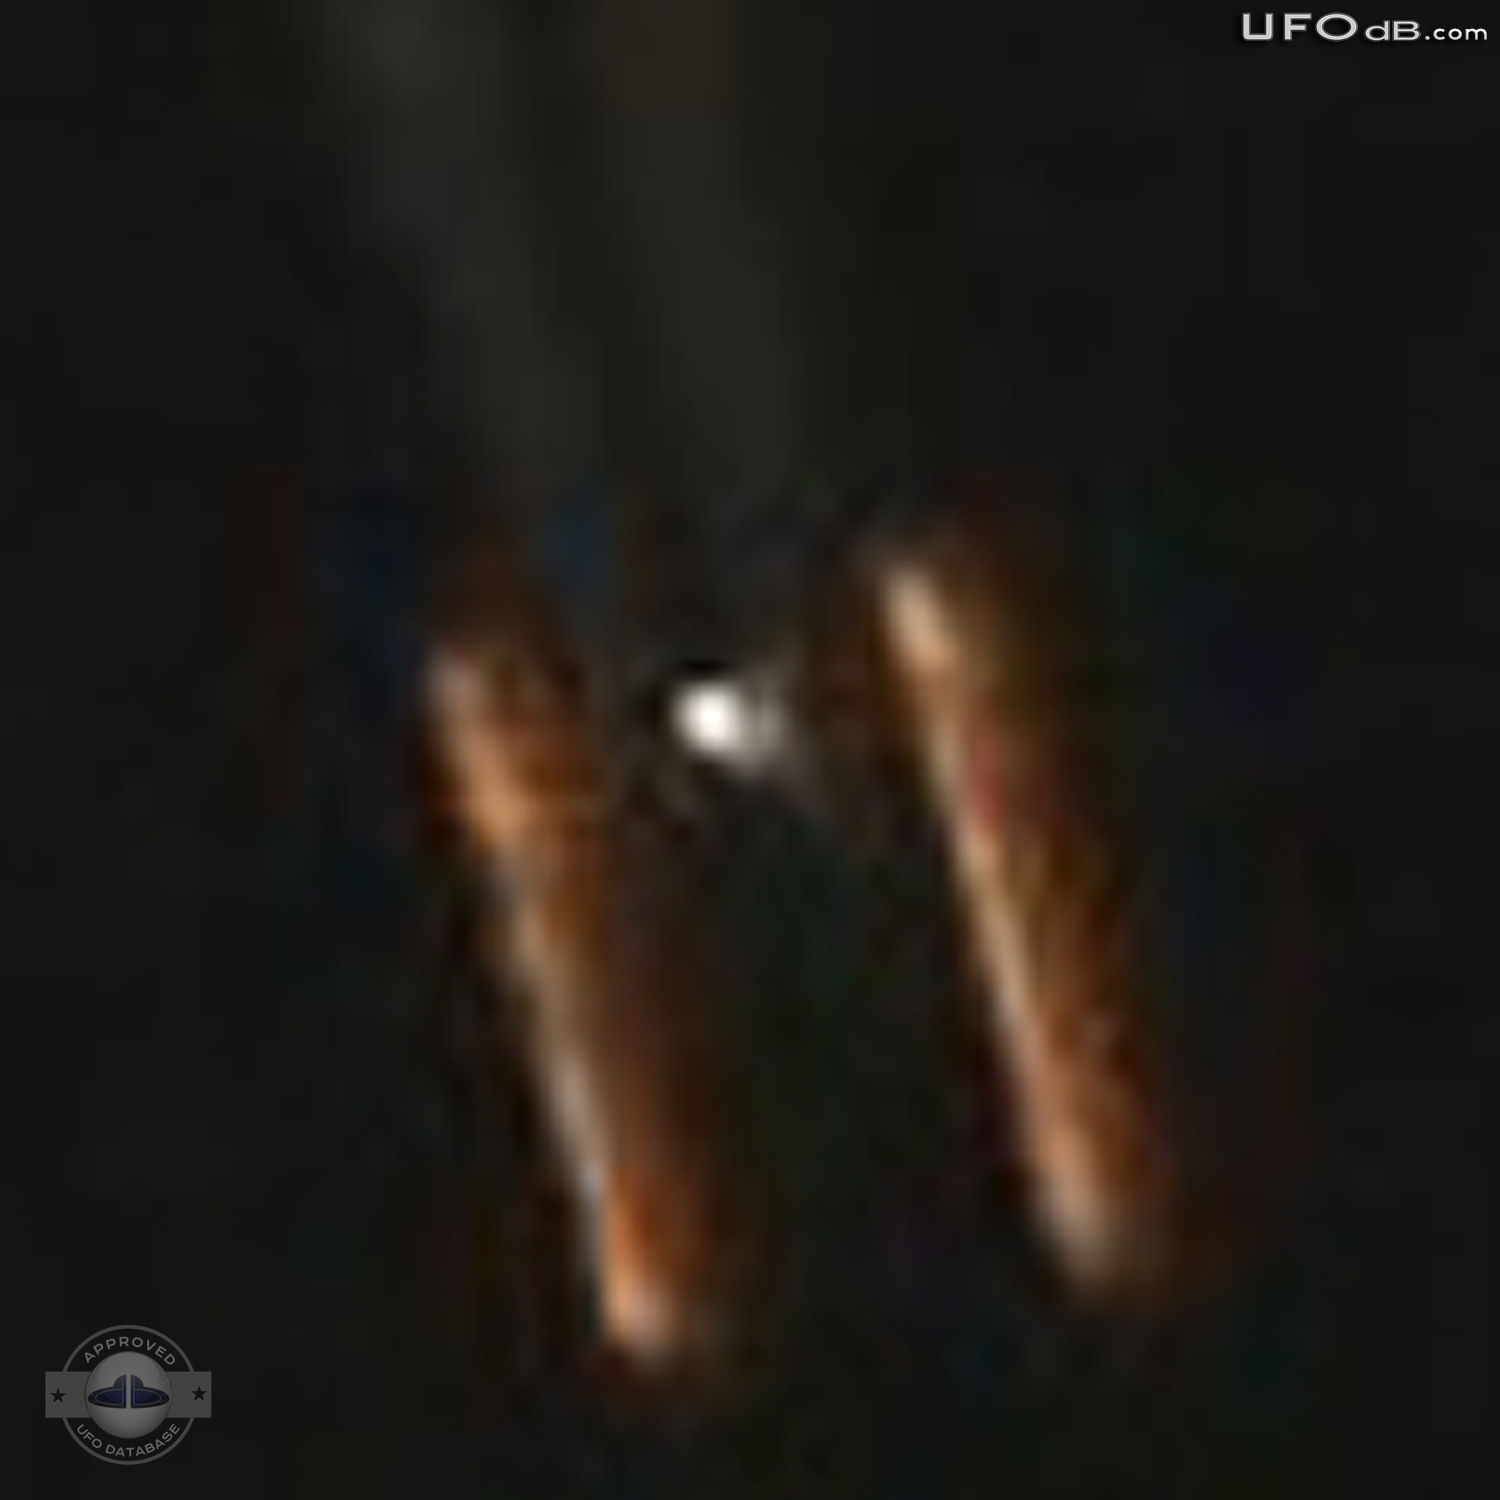 Moon picture captures a very strange shaped UFO | Louisiana USA 2011 UFO Picture #257-5